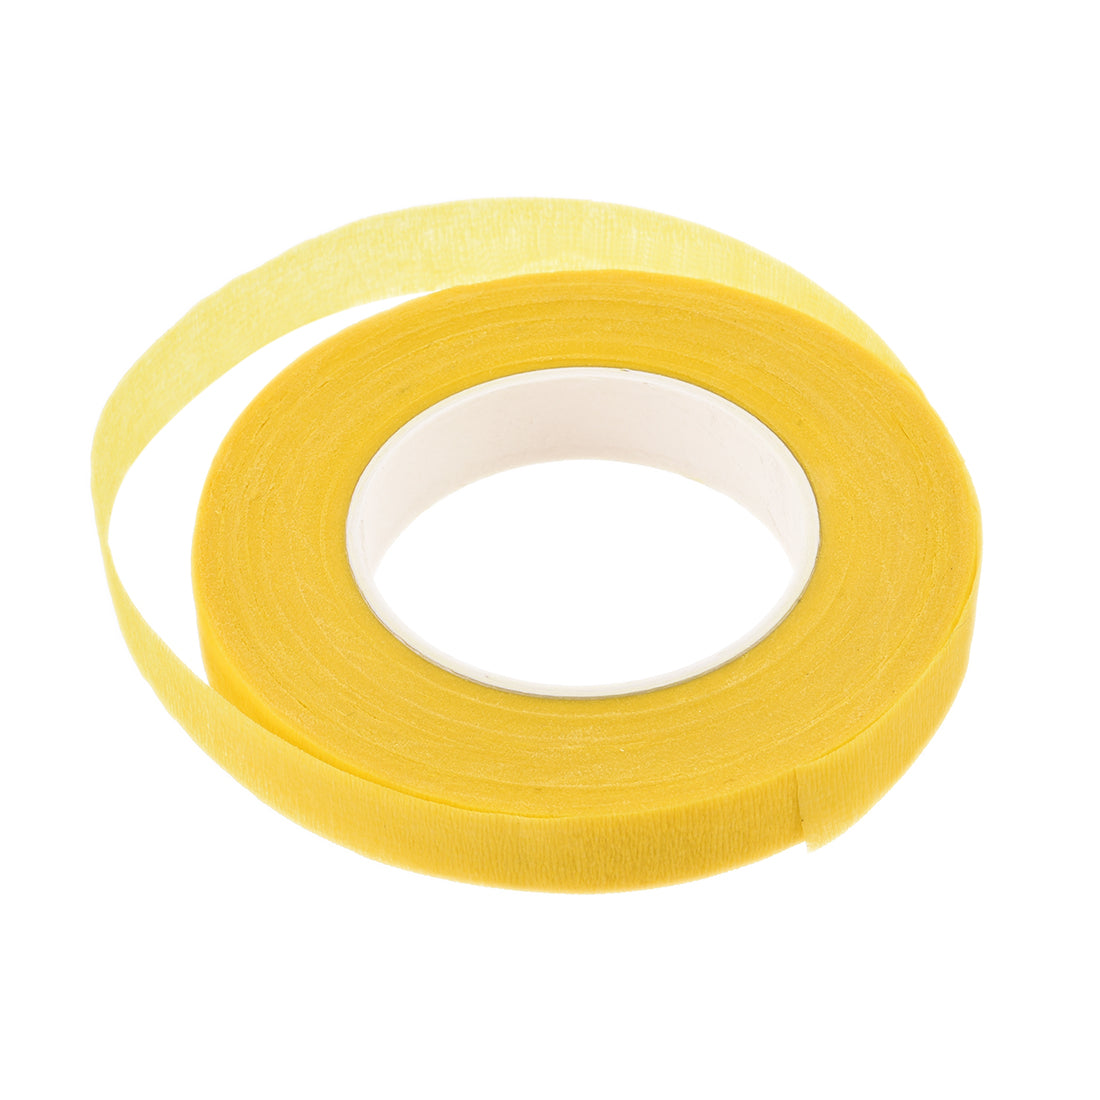 uxcell Uxcell 4Roll 1/2"x30Yard Yellow Floral Tape Flower Adhesives Floral Arrangement Kit